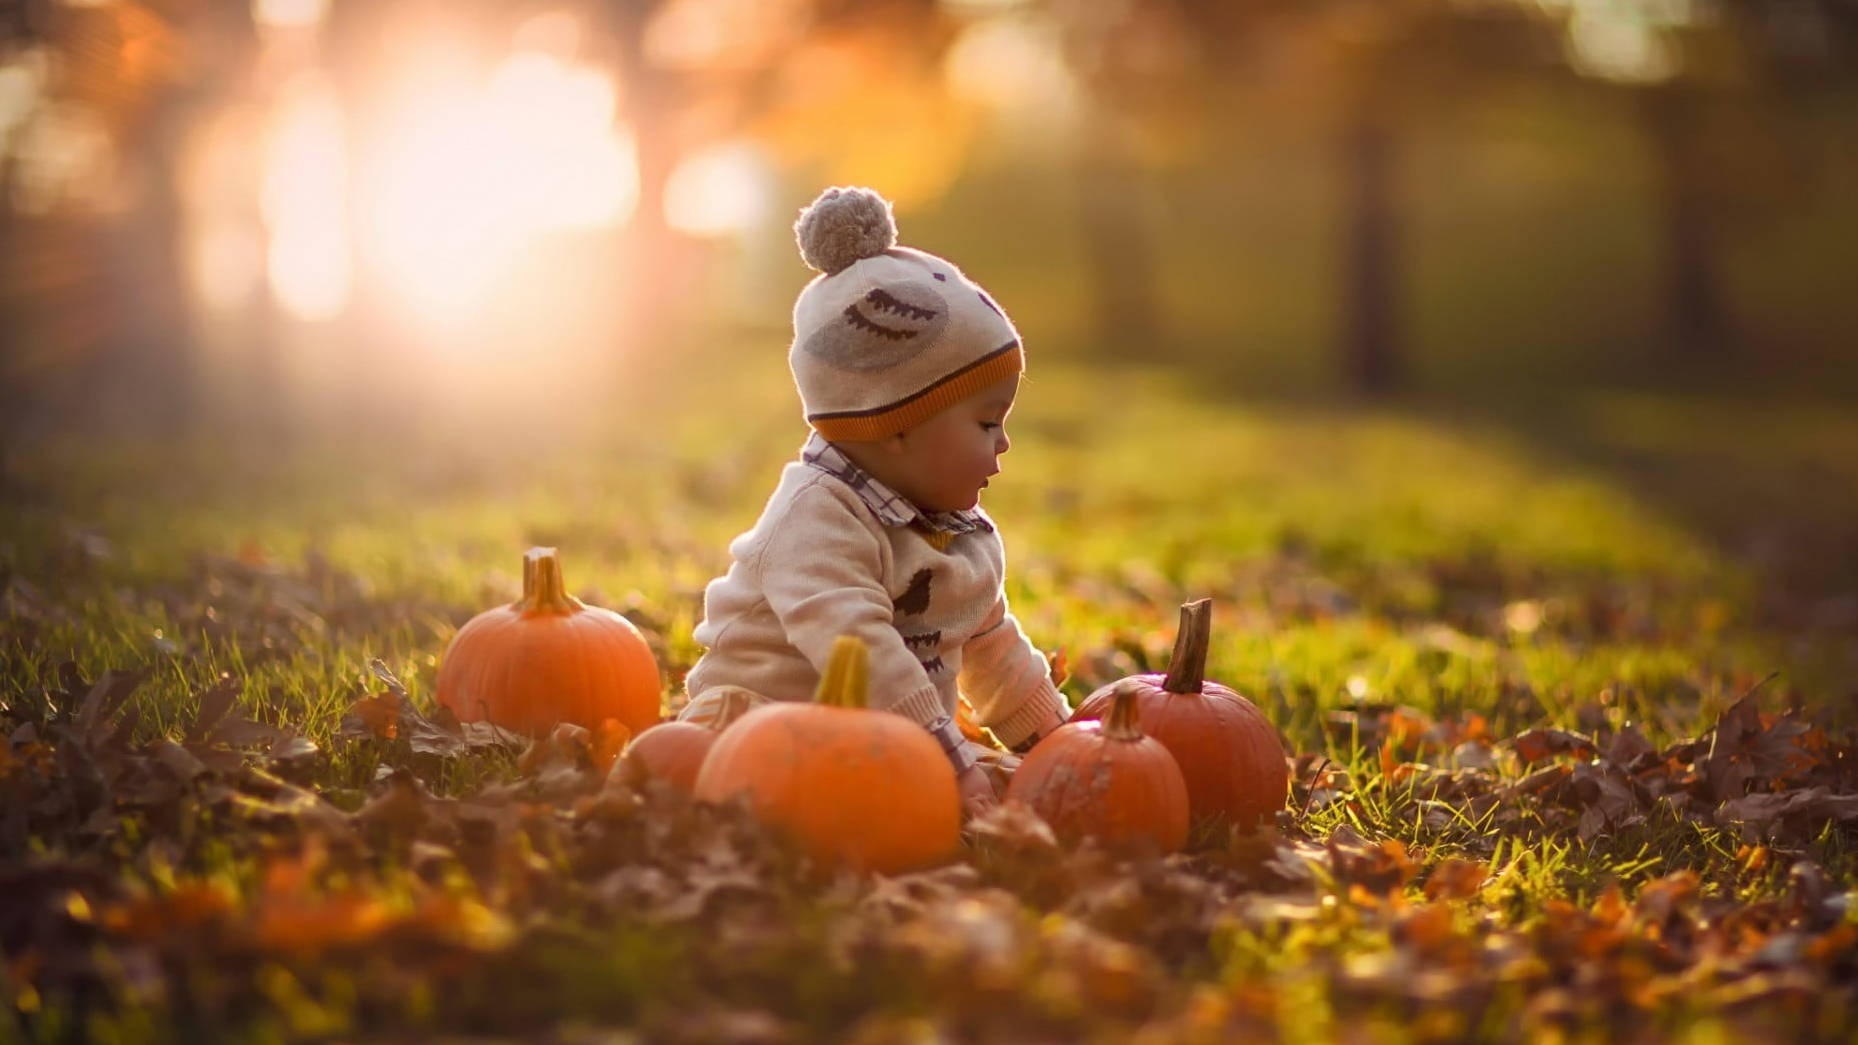 Cute Halloween Baby In Park Background